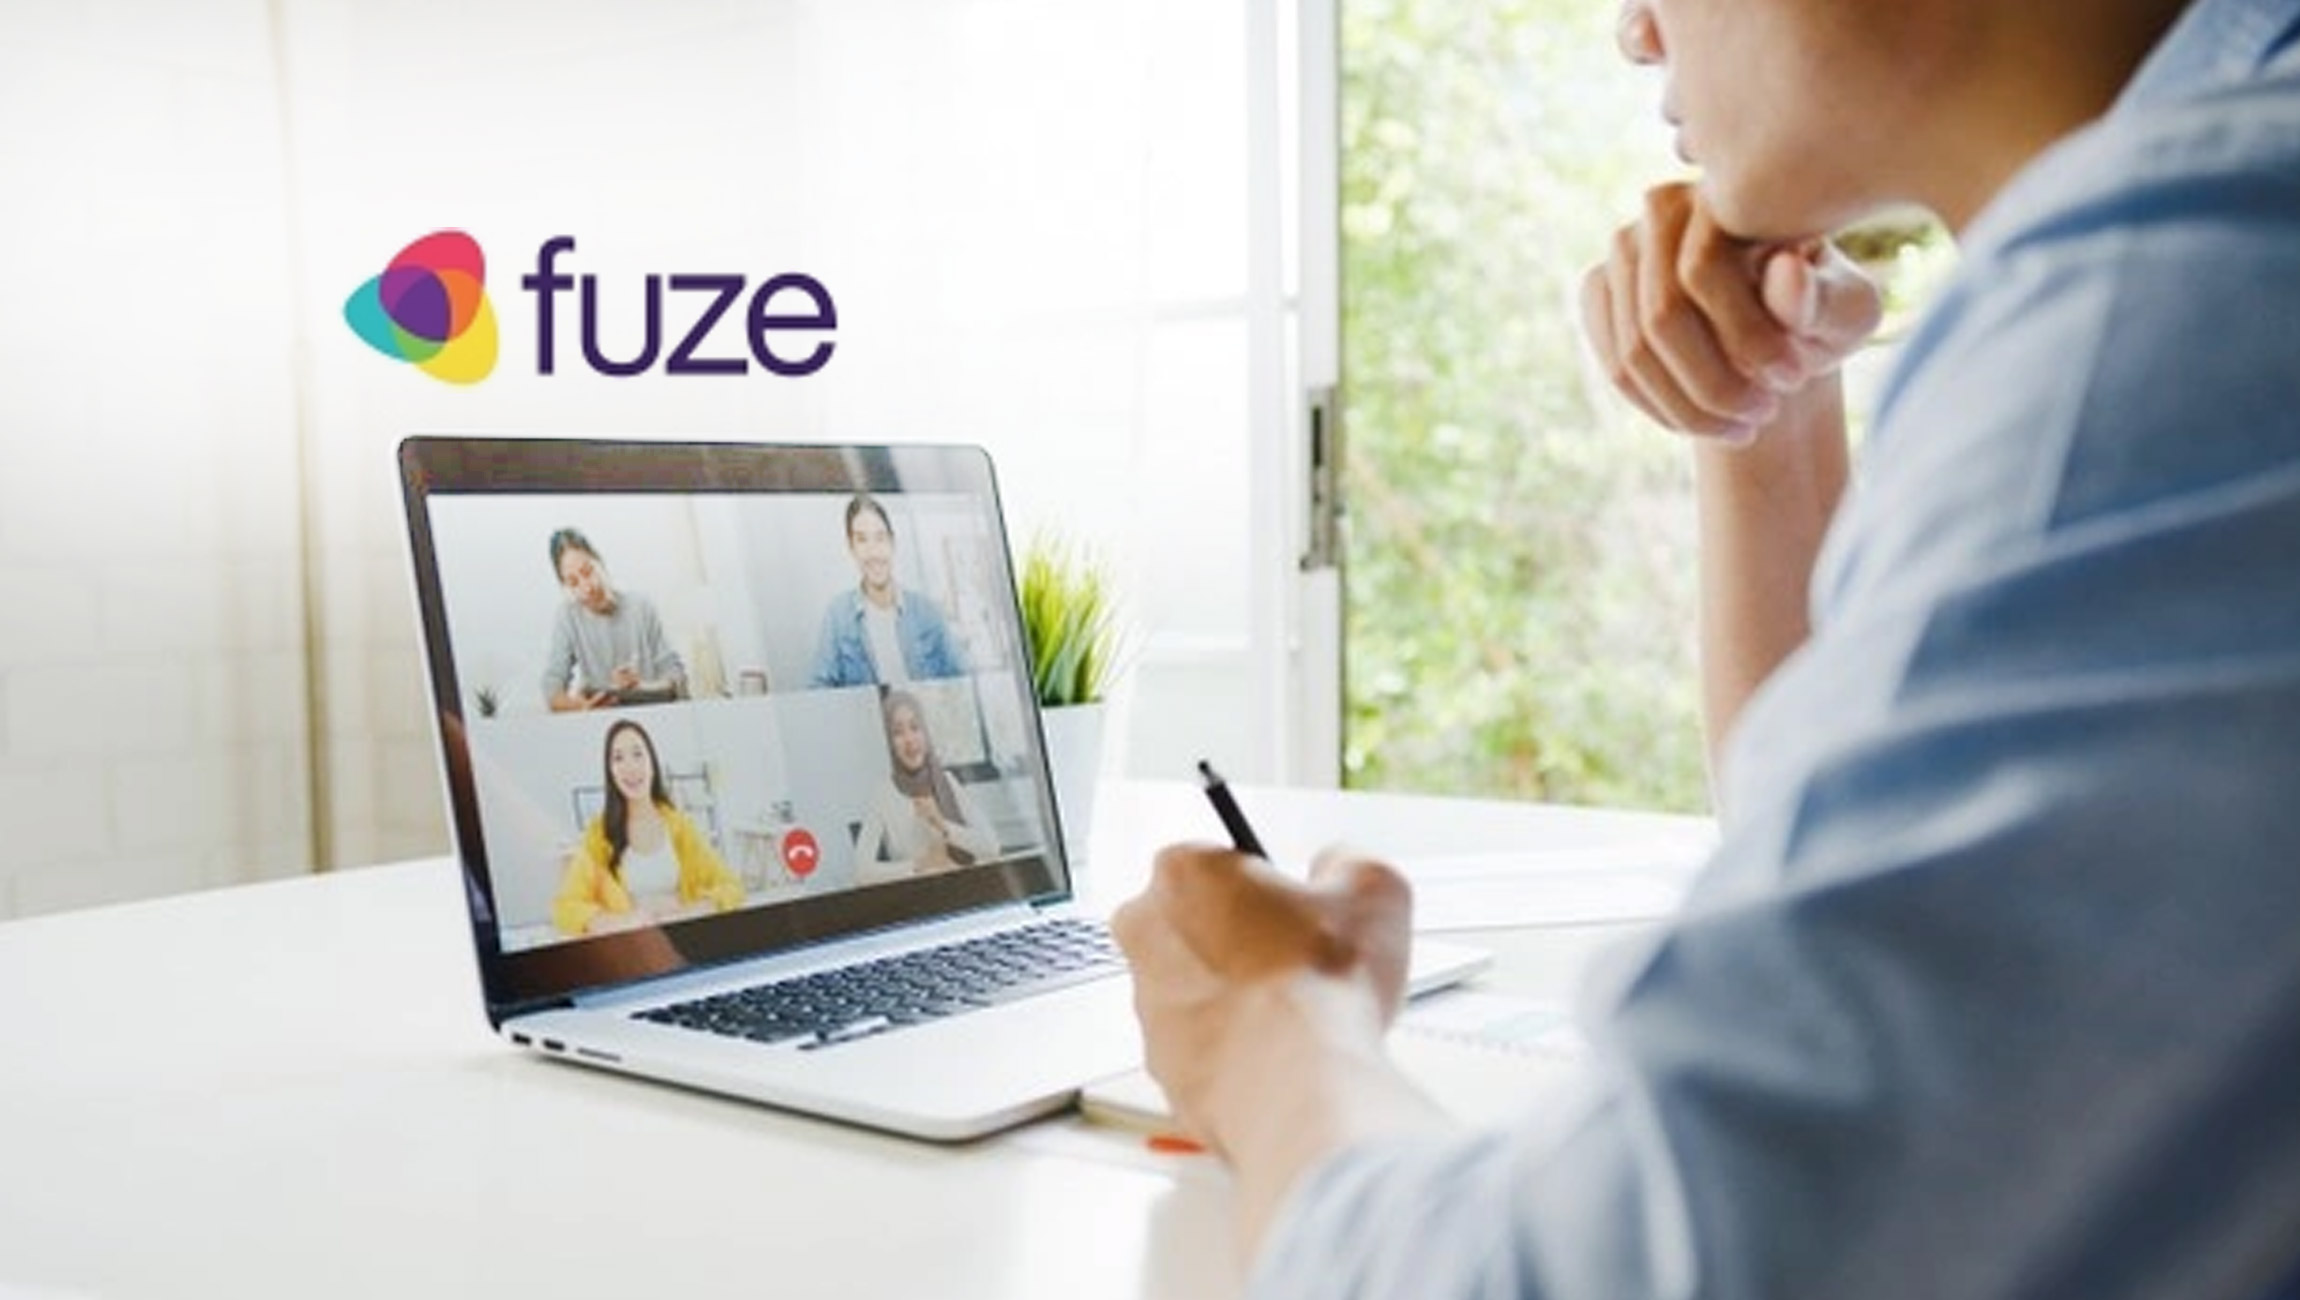 Fuze Named A Leader in the 2021 Aragon Research Globe™ for Video Conferencing